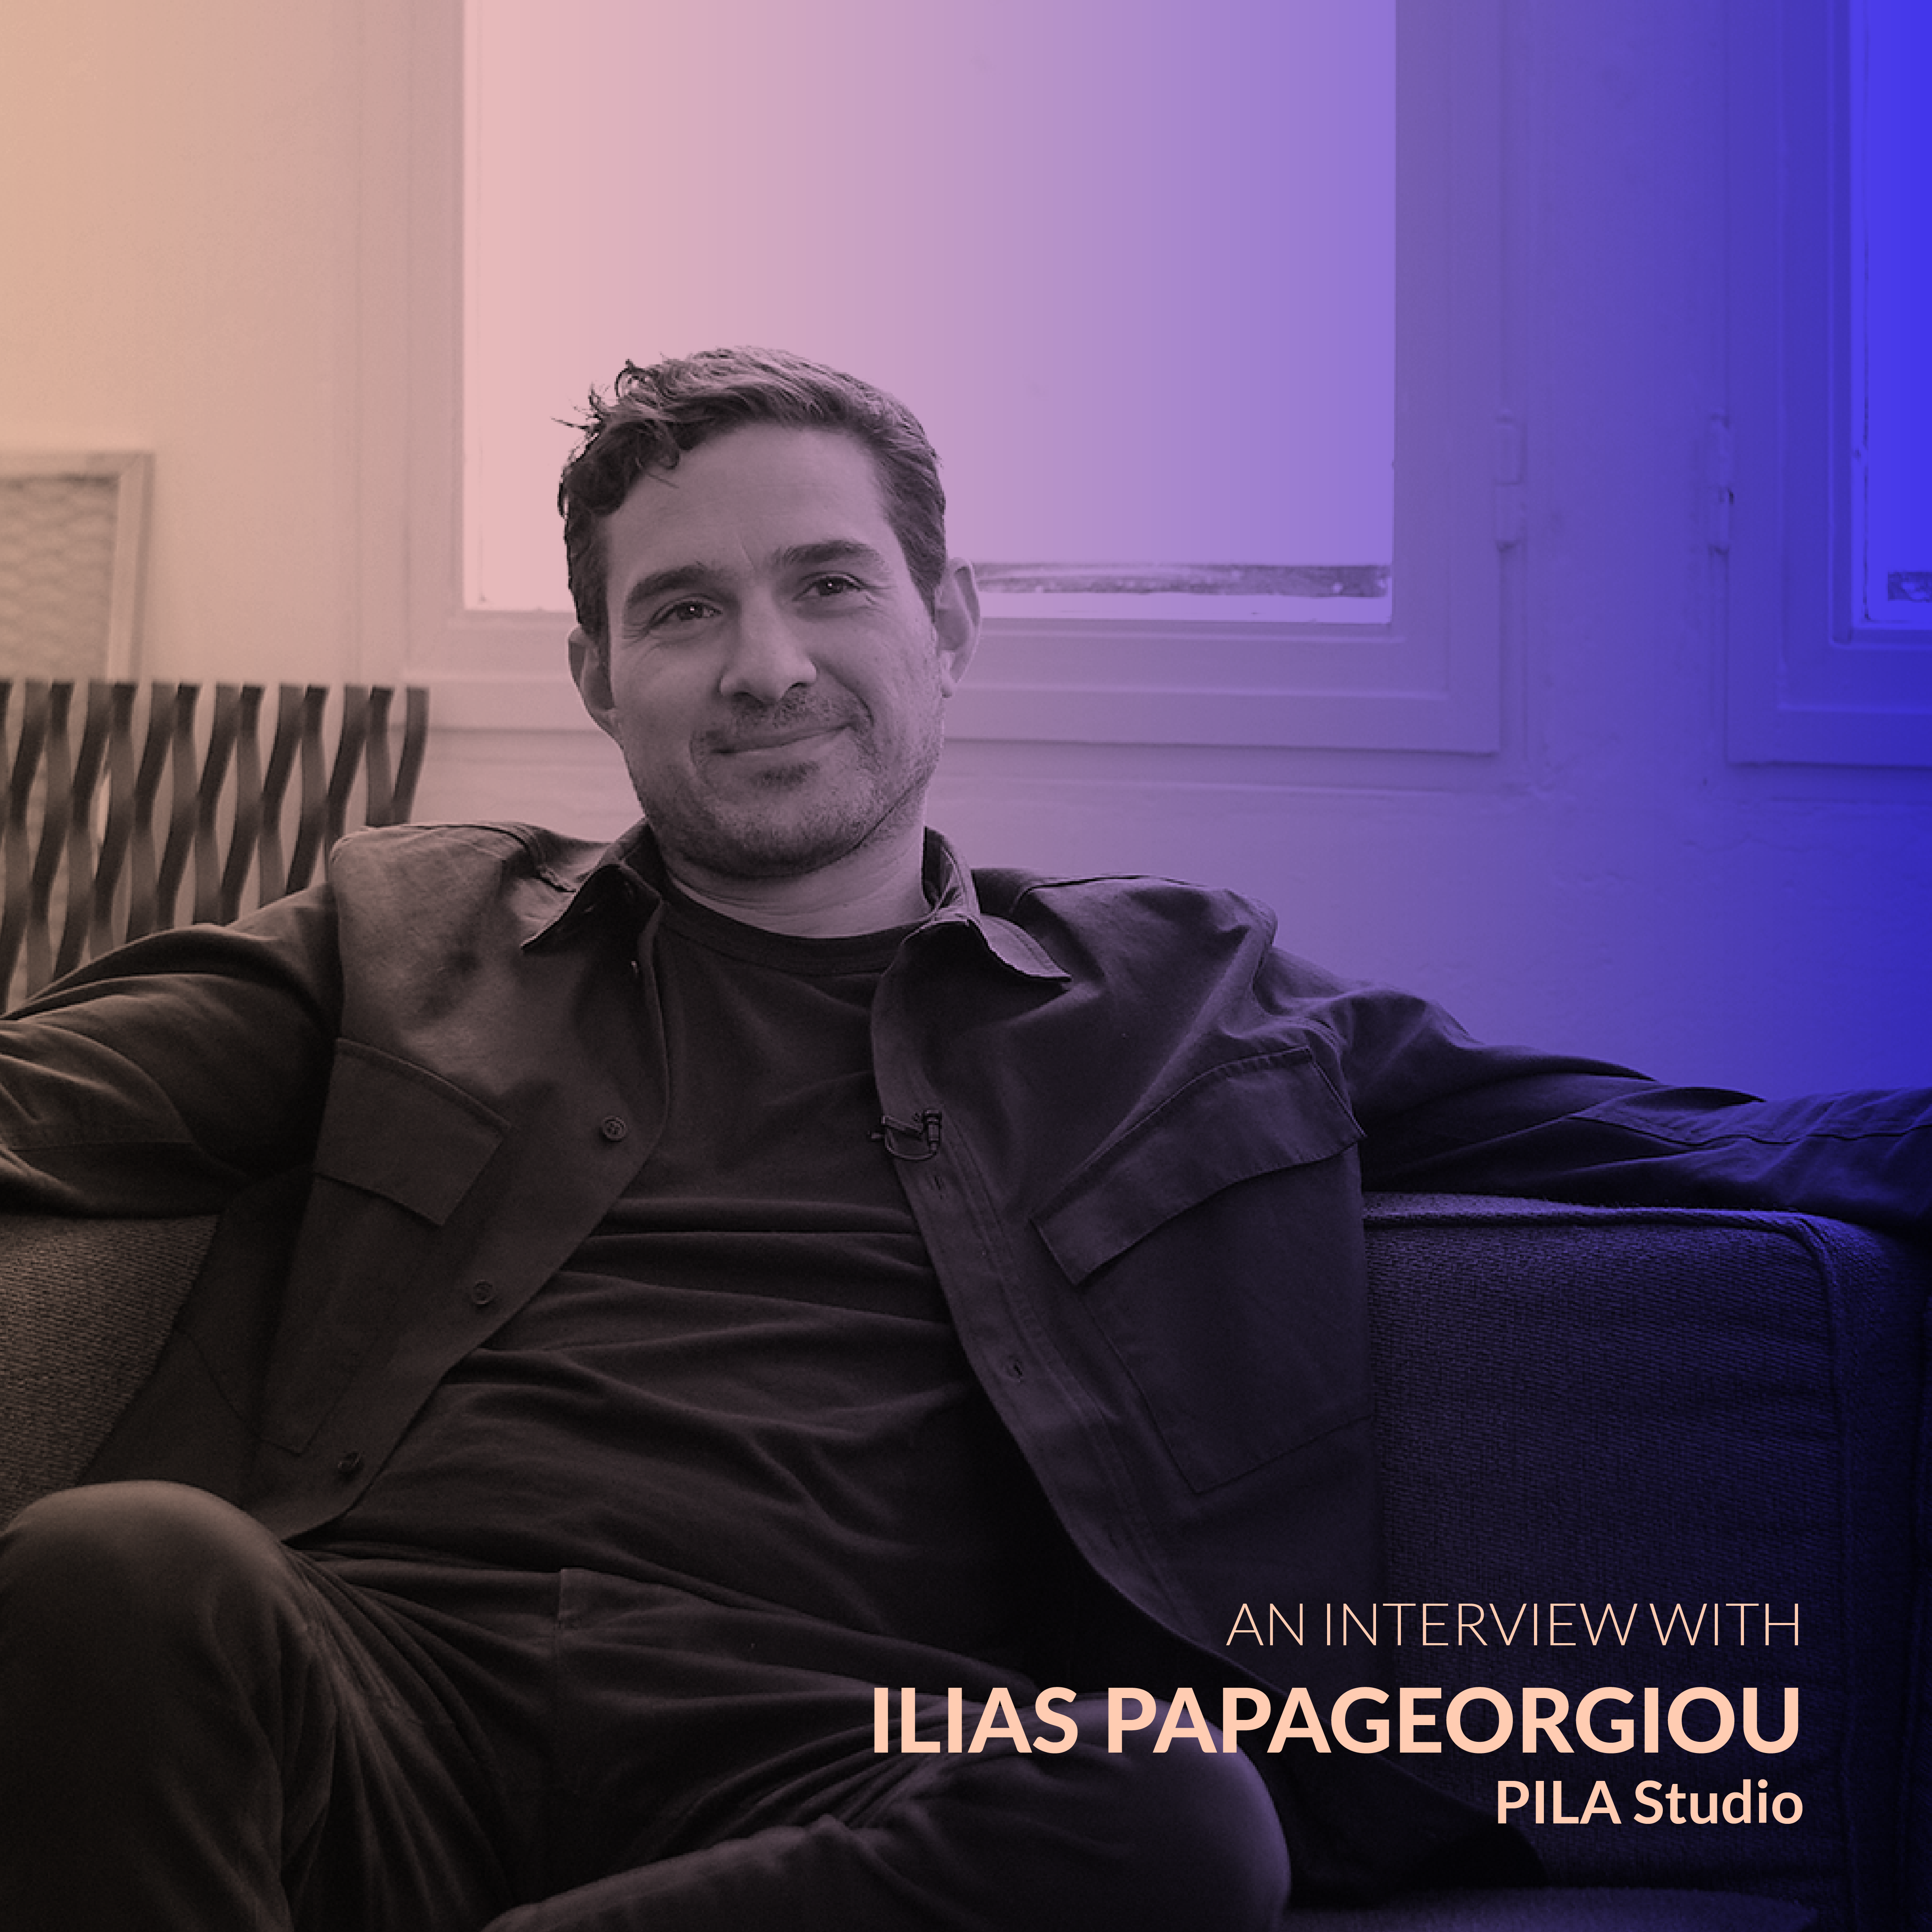 Archisearch The Visionaries - Interview Series with Ilias Papageorgiou, the principal architect of PILA.